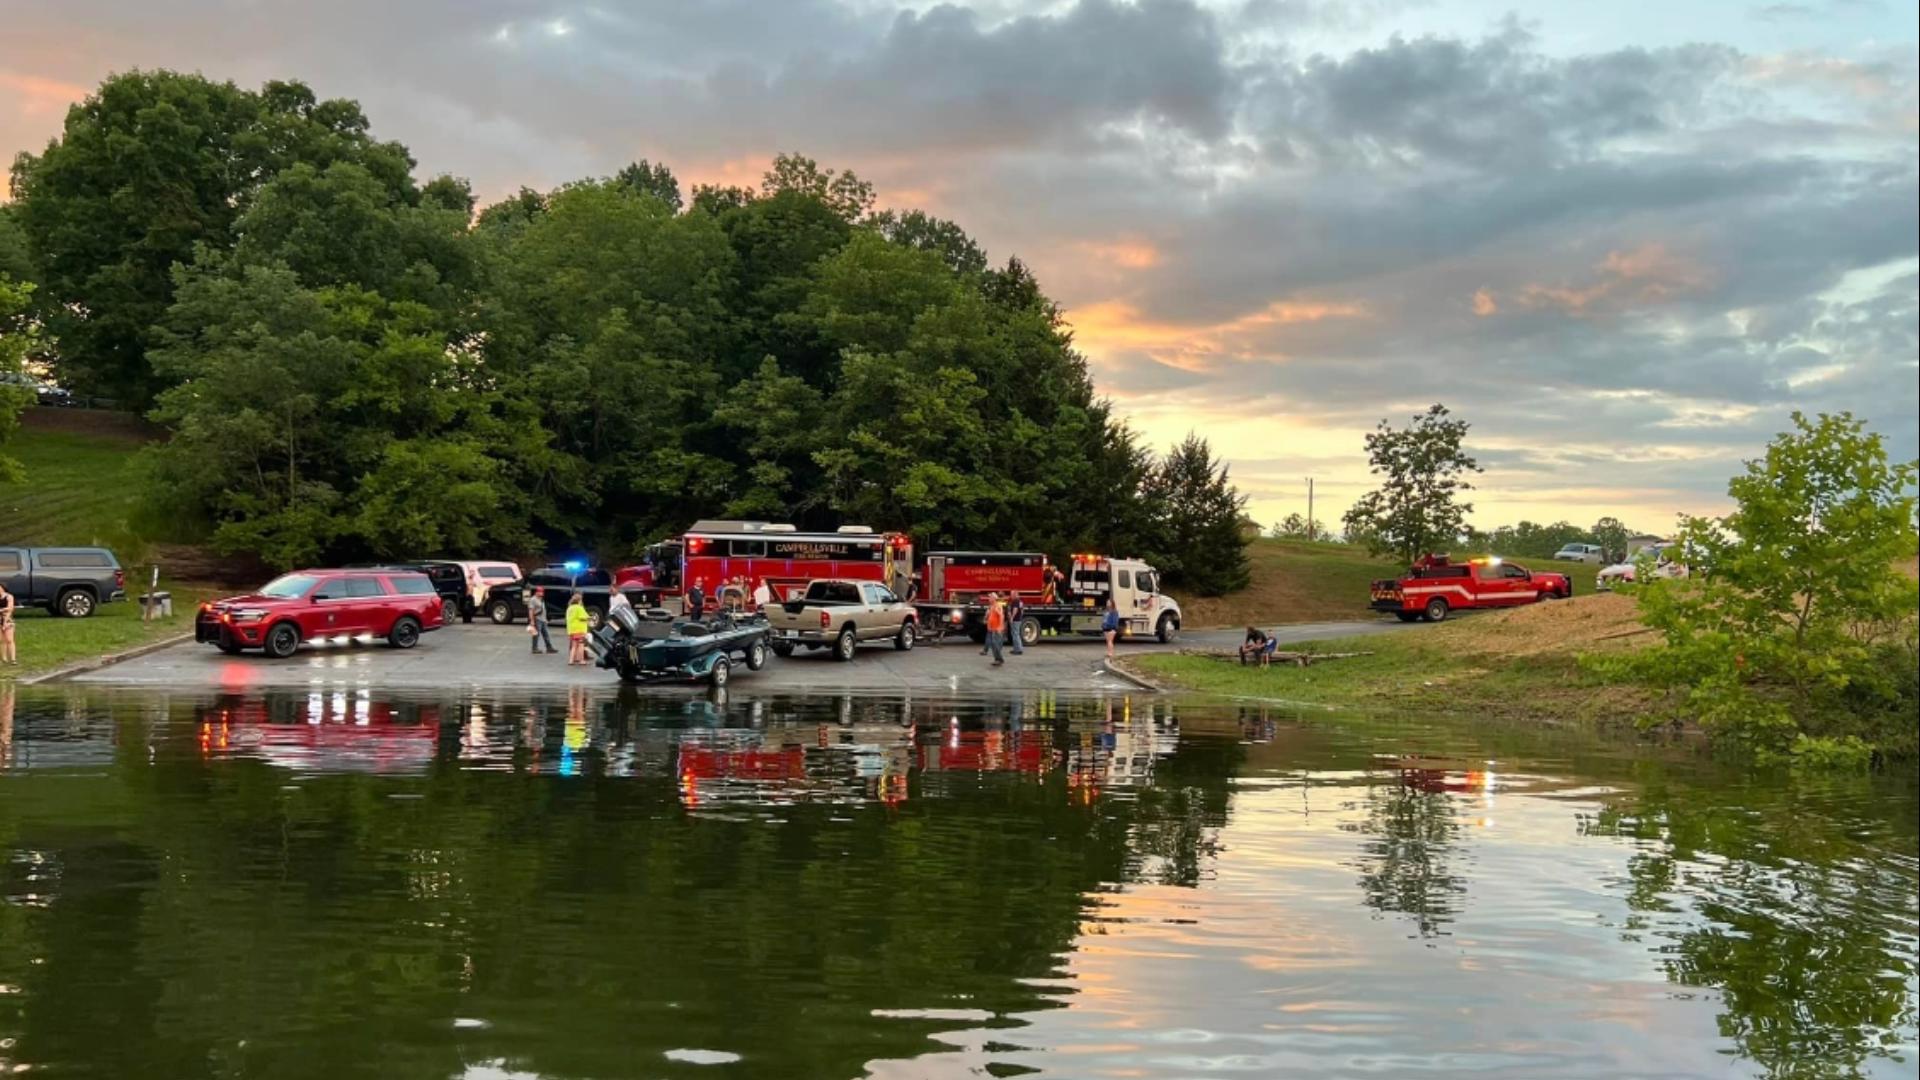 Campbellsville Fire & Rescue officials found a deceased man and his vehicle Sunday in a Kentucky lake.